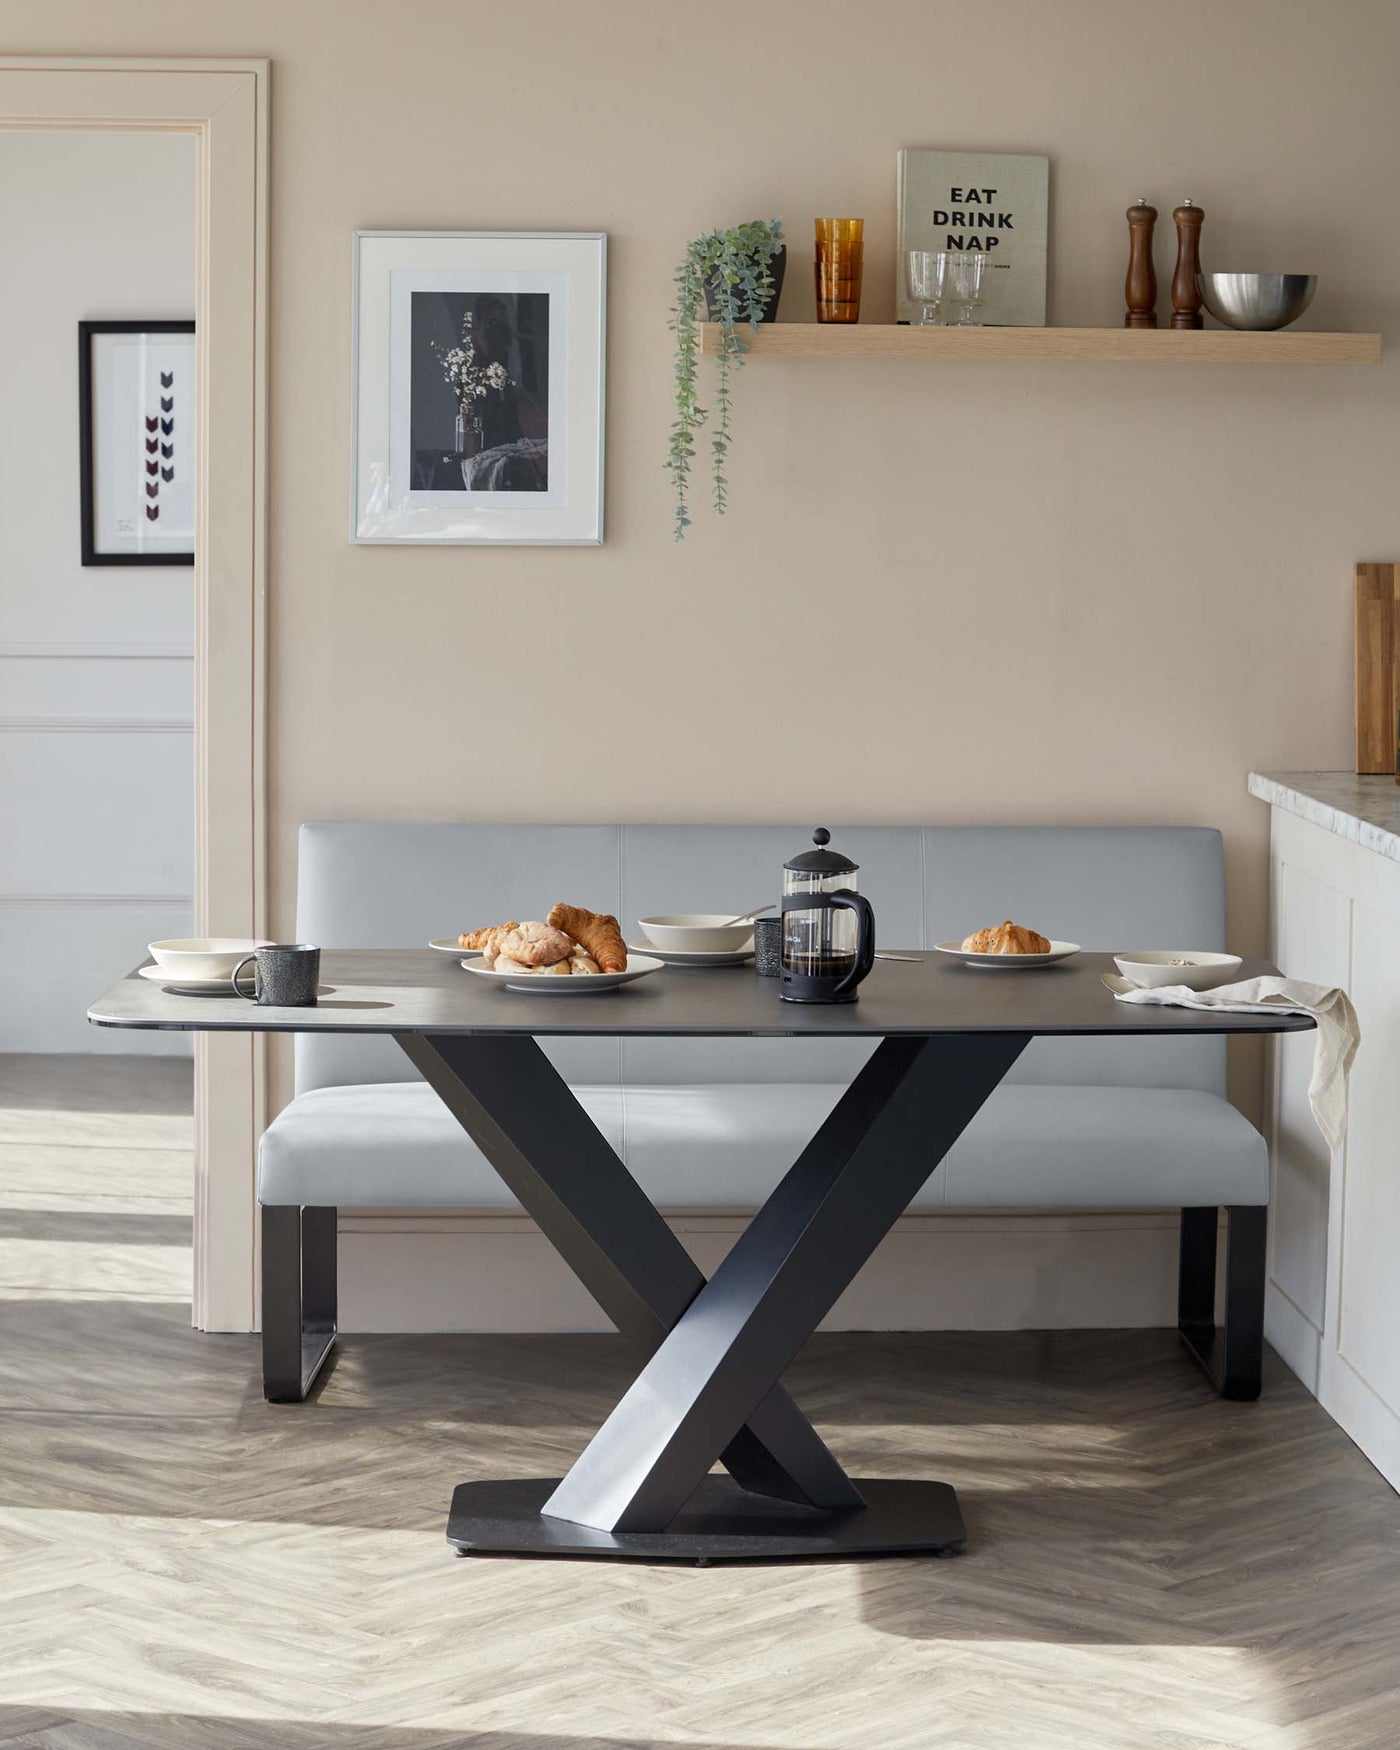 Modern dining room furniture featuring a dark-toned tabletop with a striking X-shaped metal base paired with a long, contemporary bench with grey upholstery. A wooden floating shelf is mounted above, displaying decorative items.